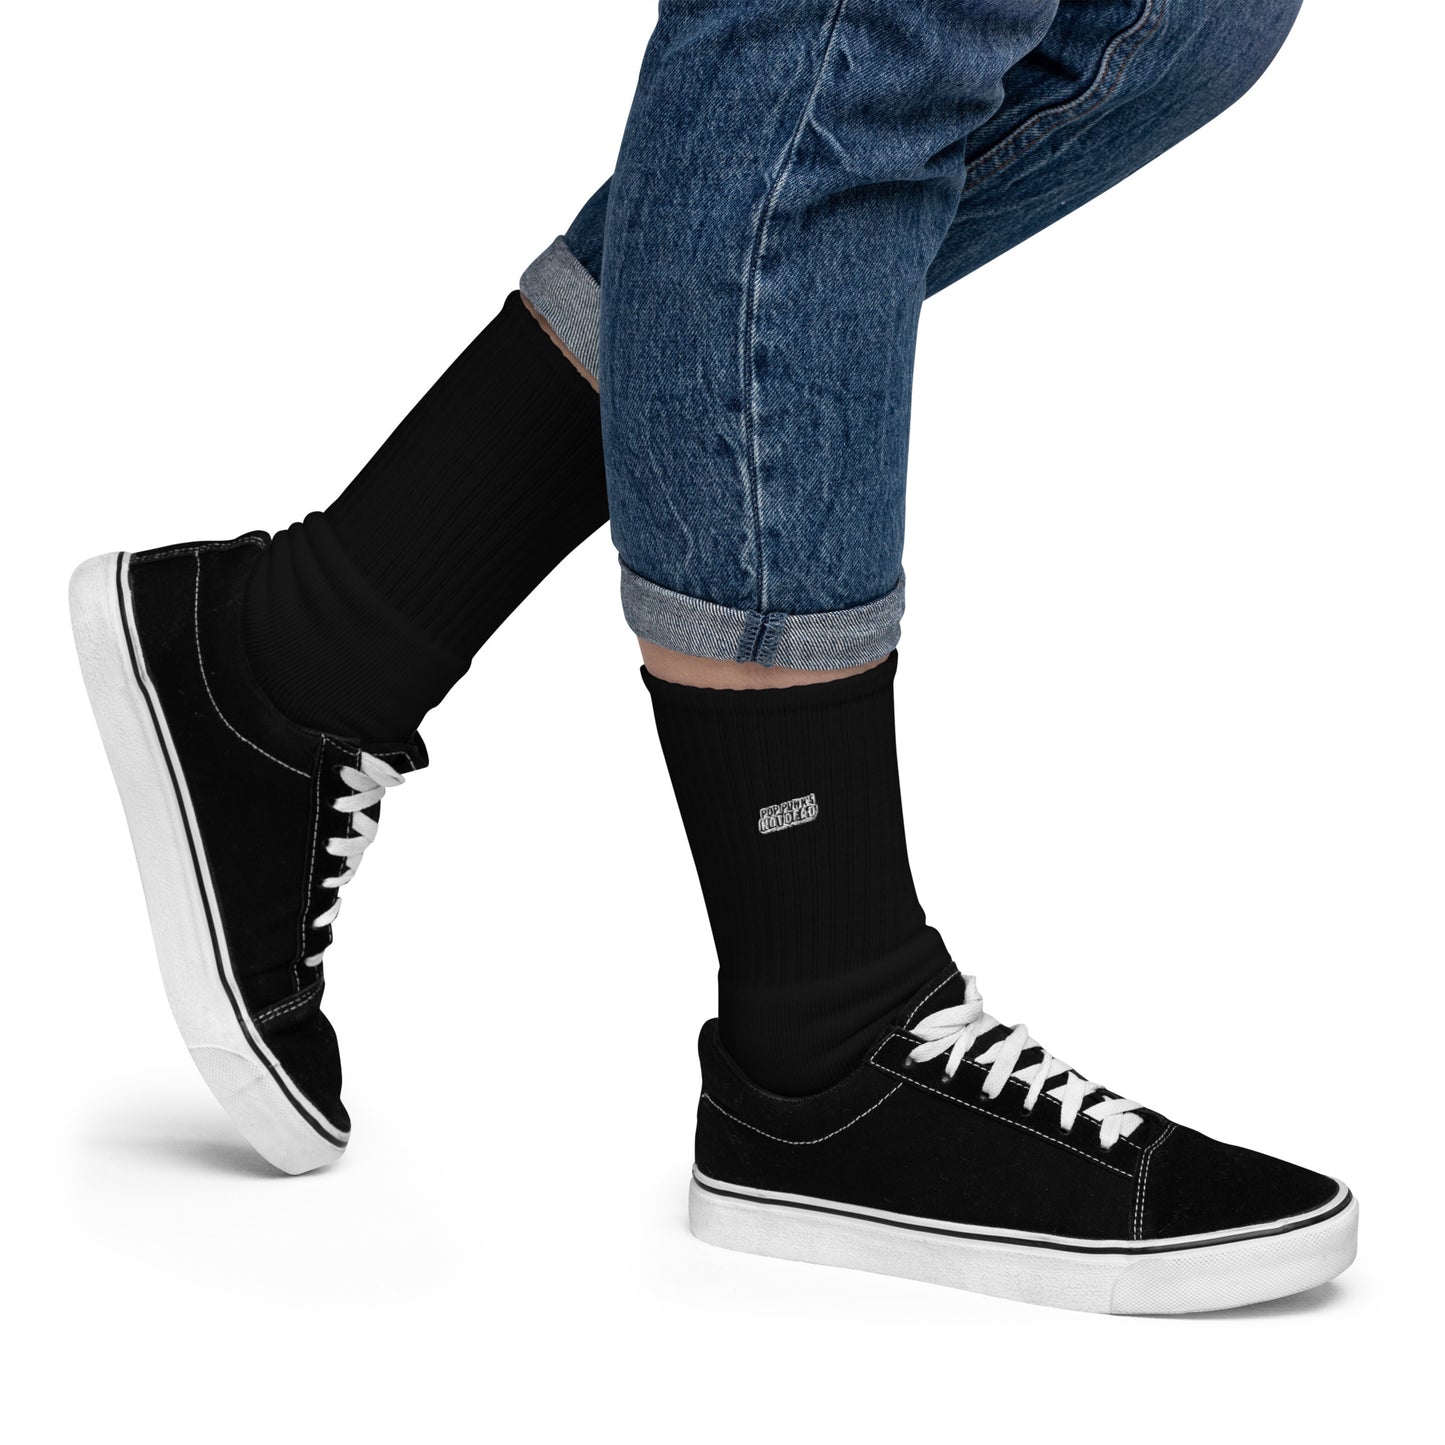 Pop Punk's Not Dead Embroidered socks